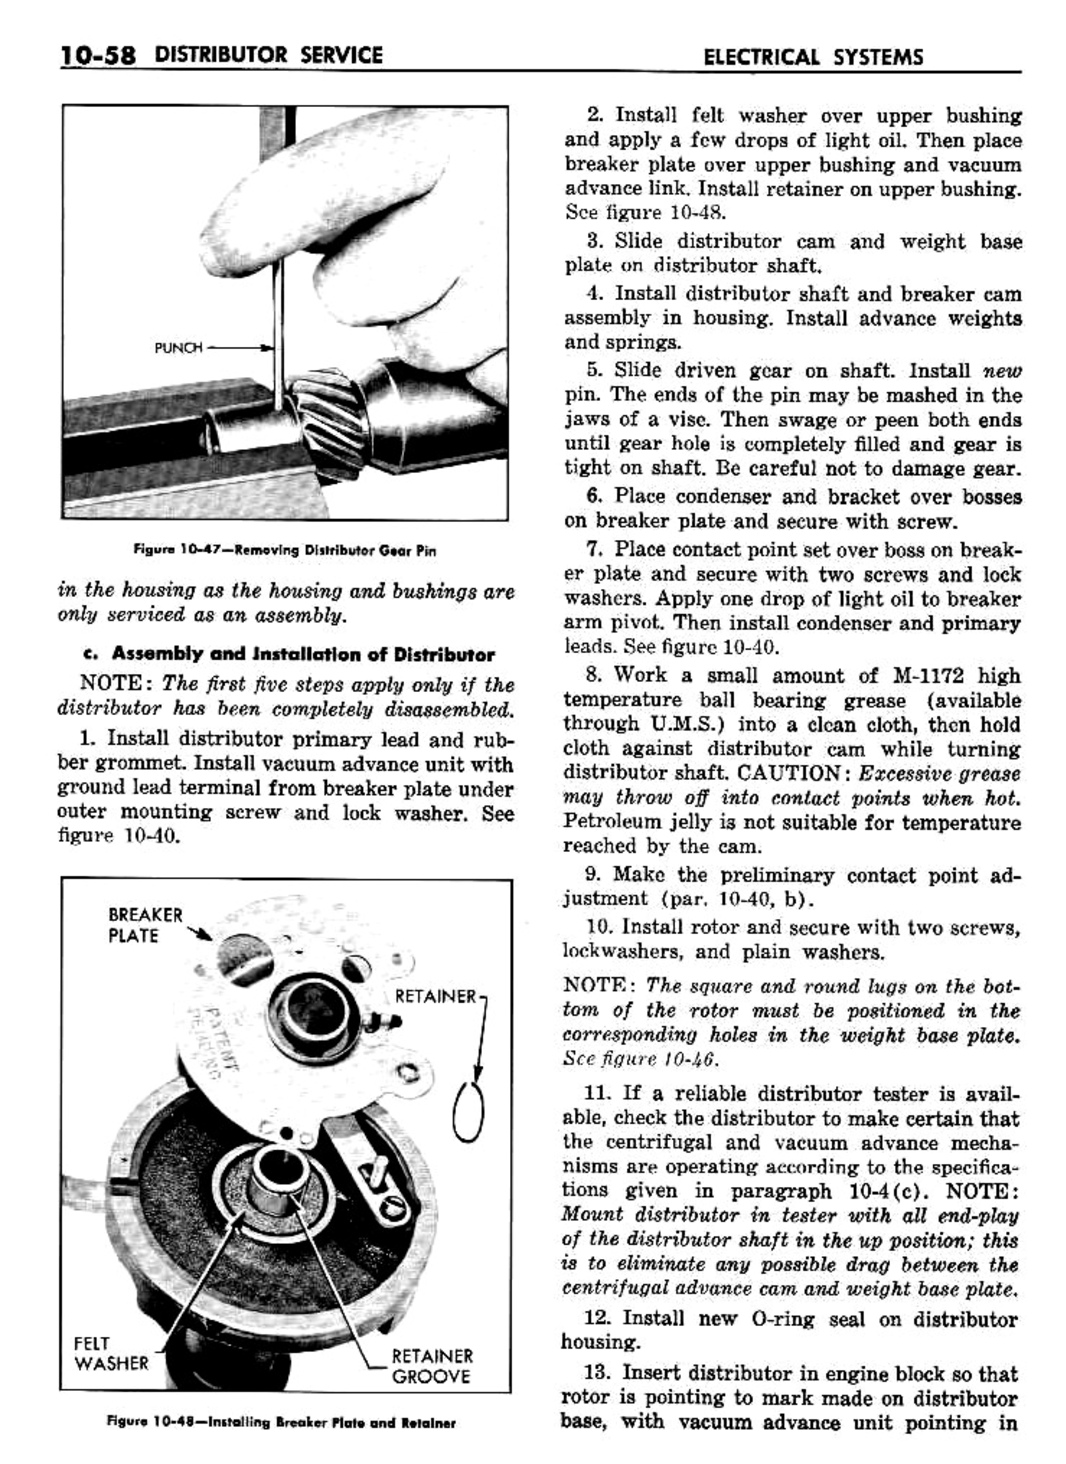 n_11 1960 Buick Shop Manual - Electrical Systems-058-058.jpg